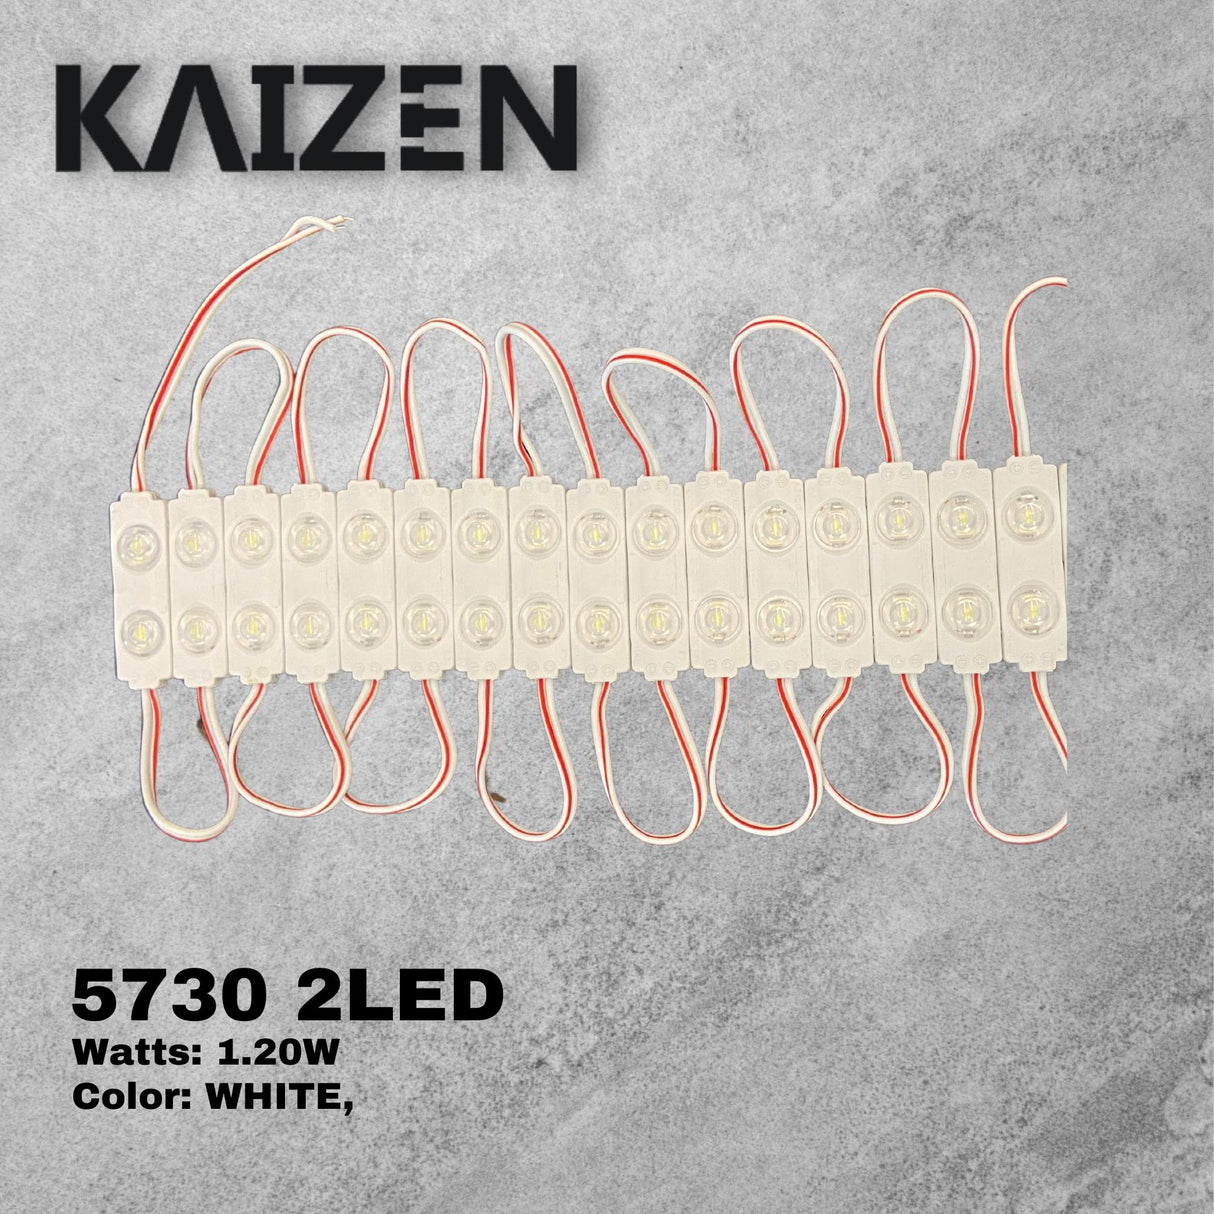 Kaizen SMD 5730 2 LED Injected Module w/ Lens